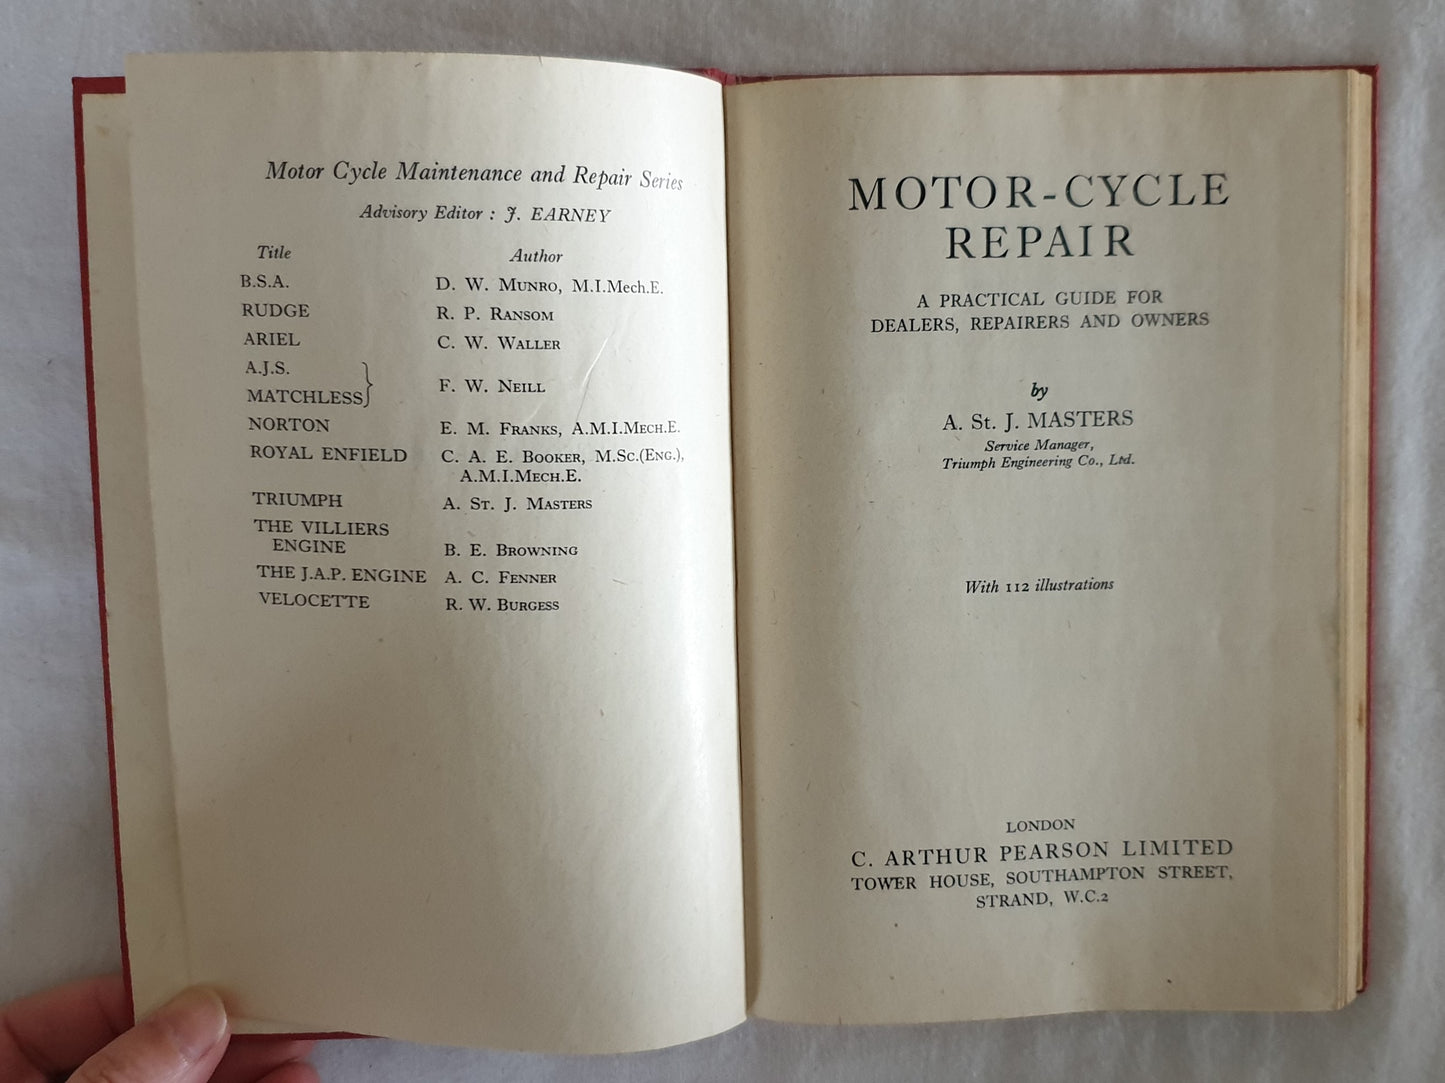 Motor-Cycle Repair by A. St. J. Masters